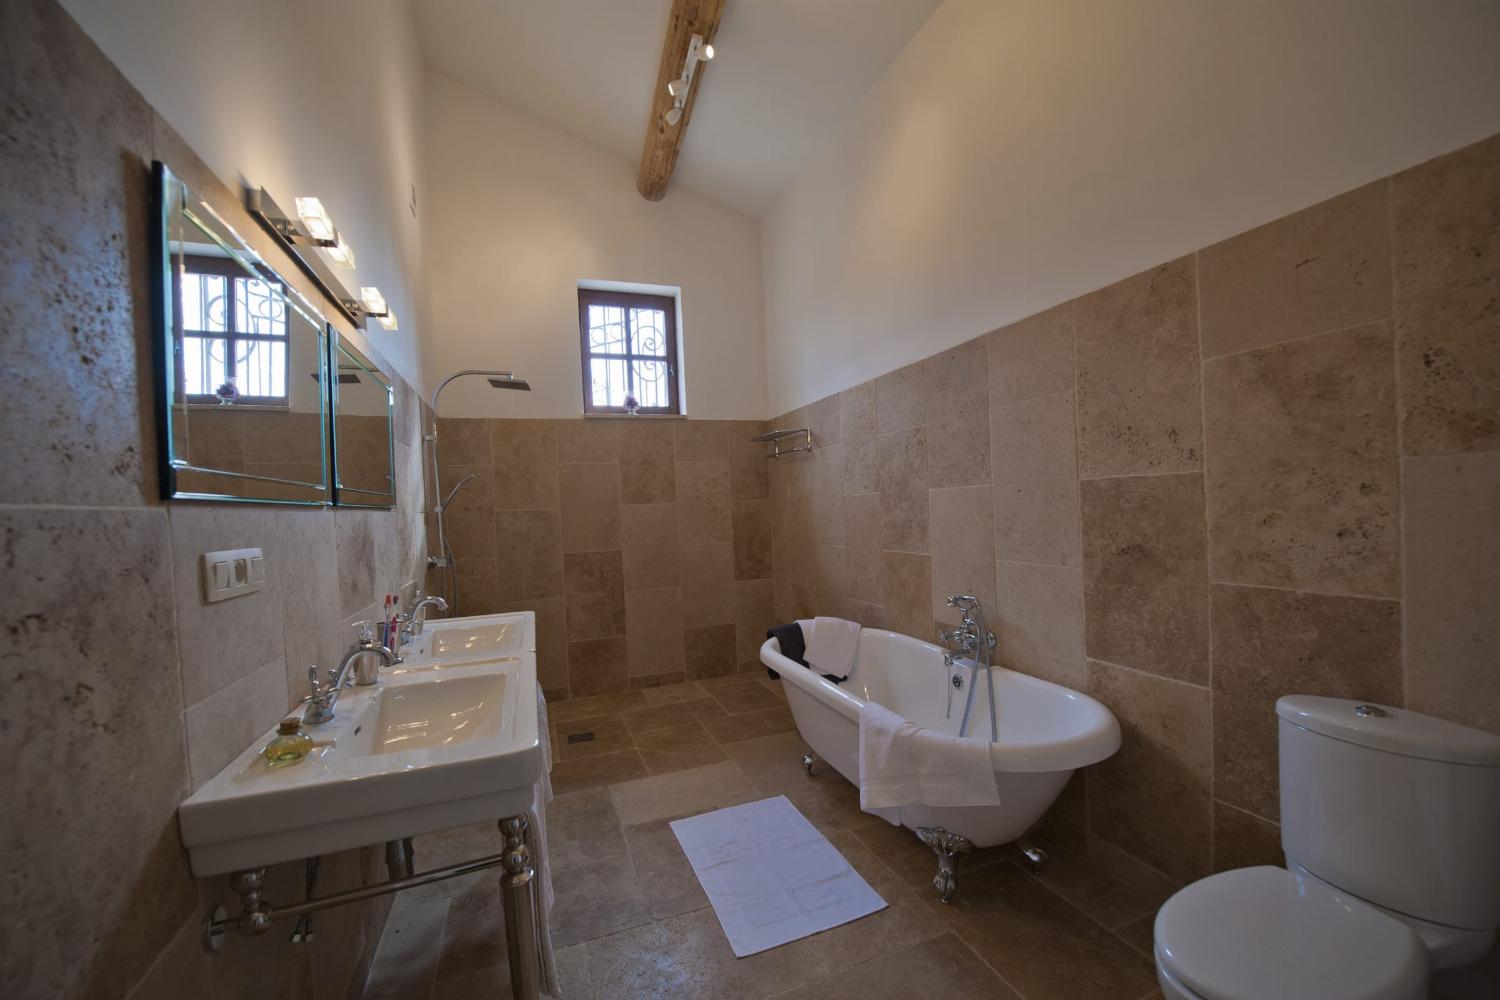 Bathroom | Rental accommodation in Provence